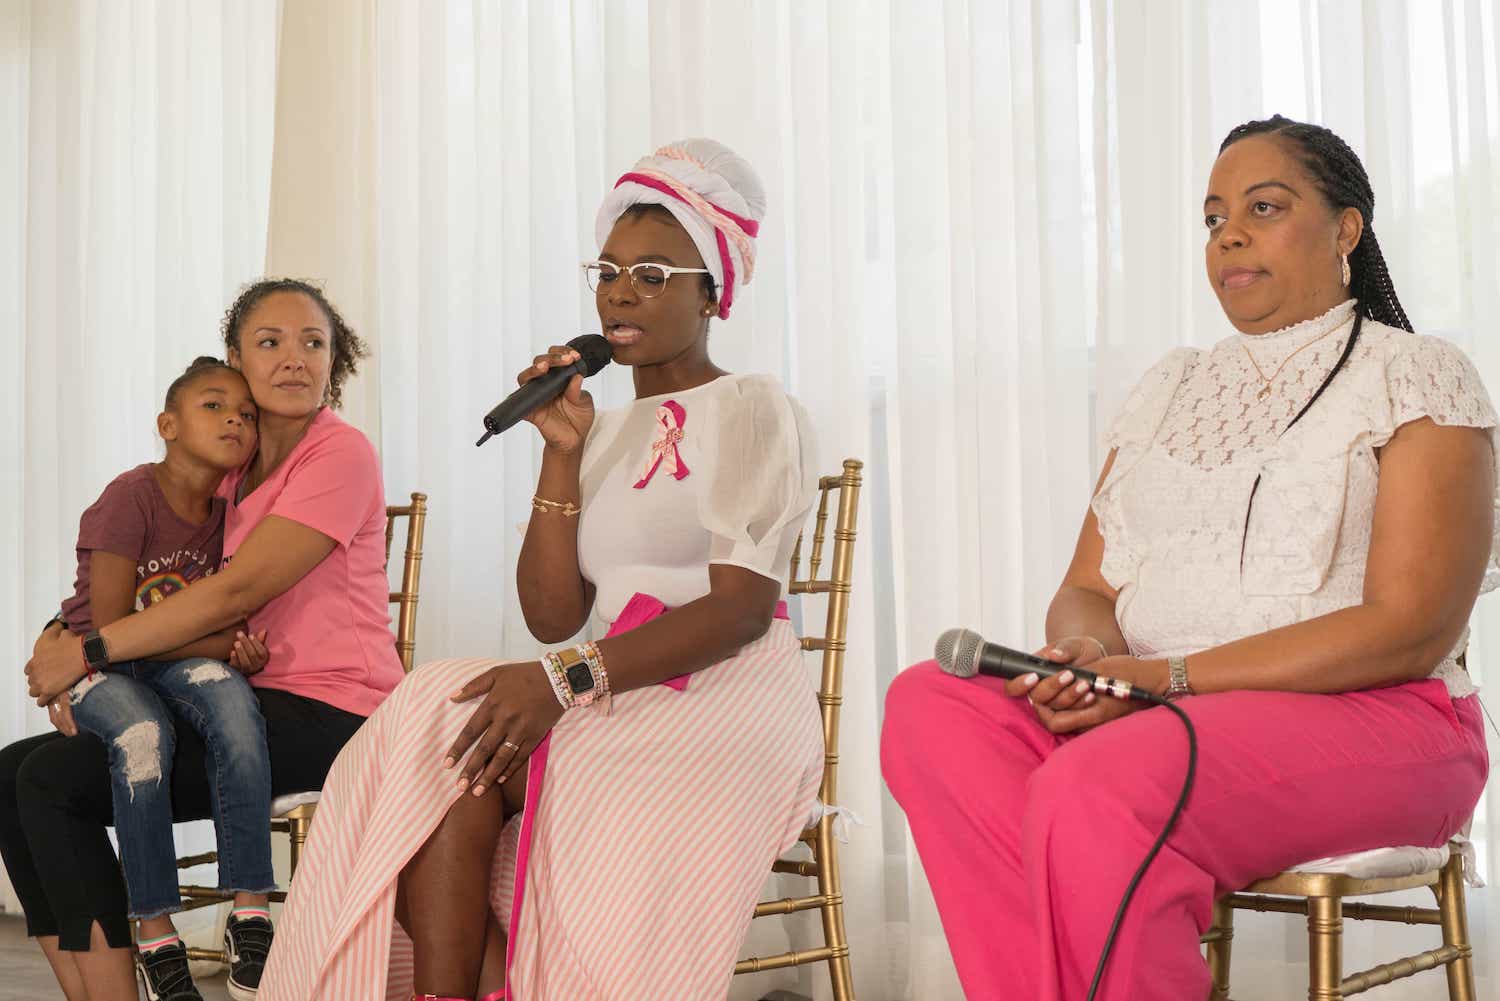 Black Women for Wellness Annual Risqué Breast Health Conference 38